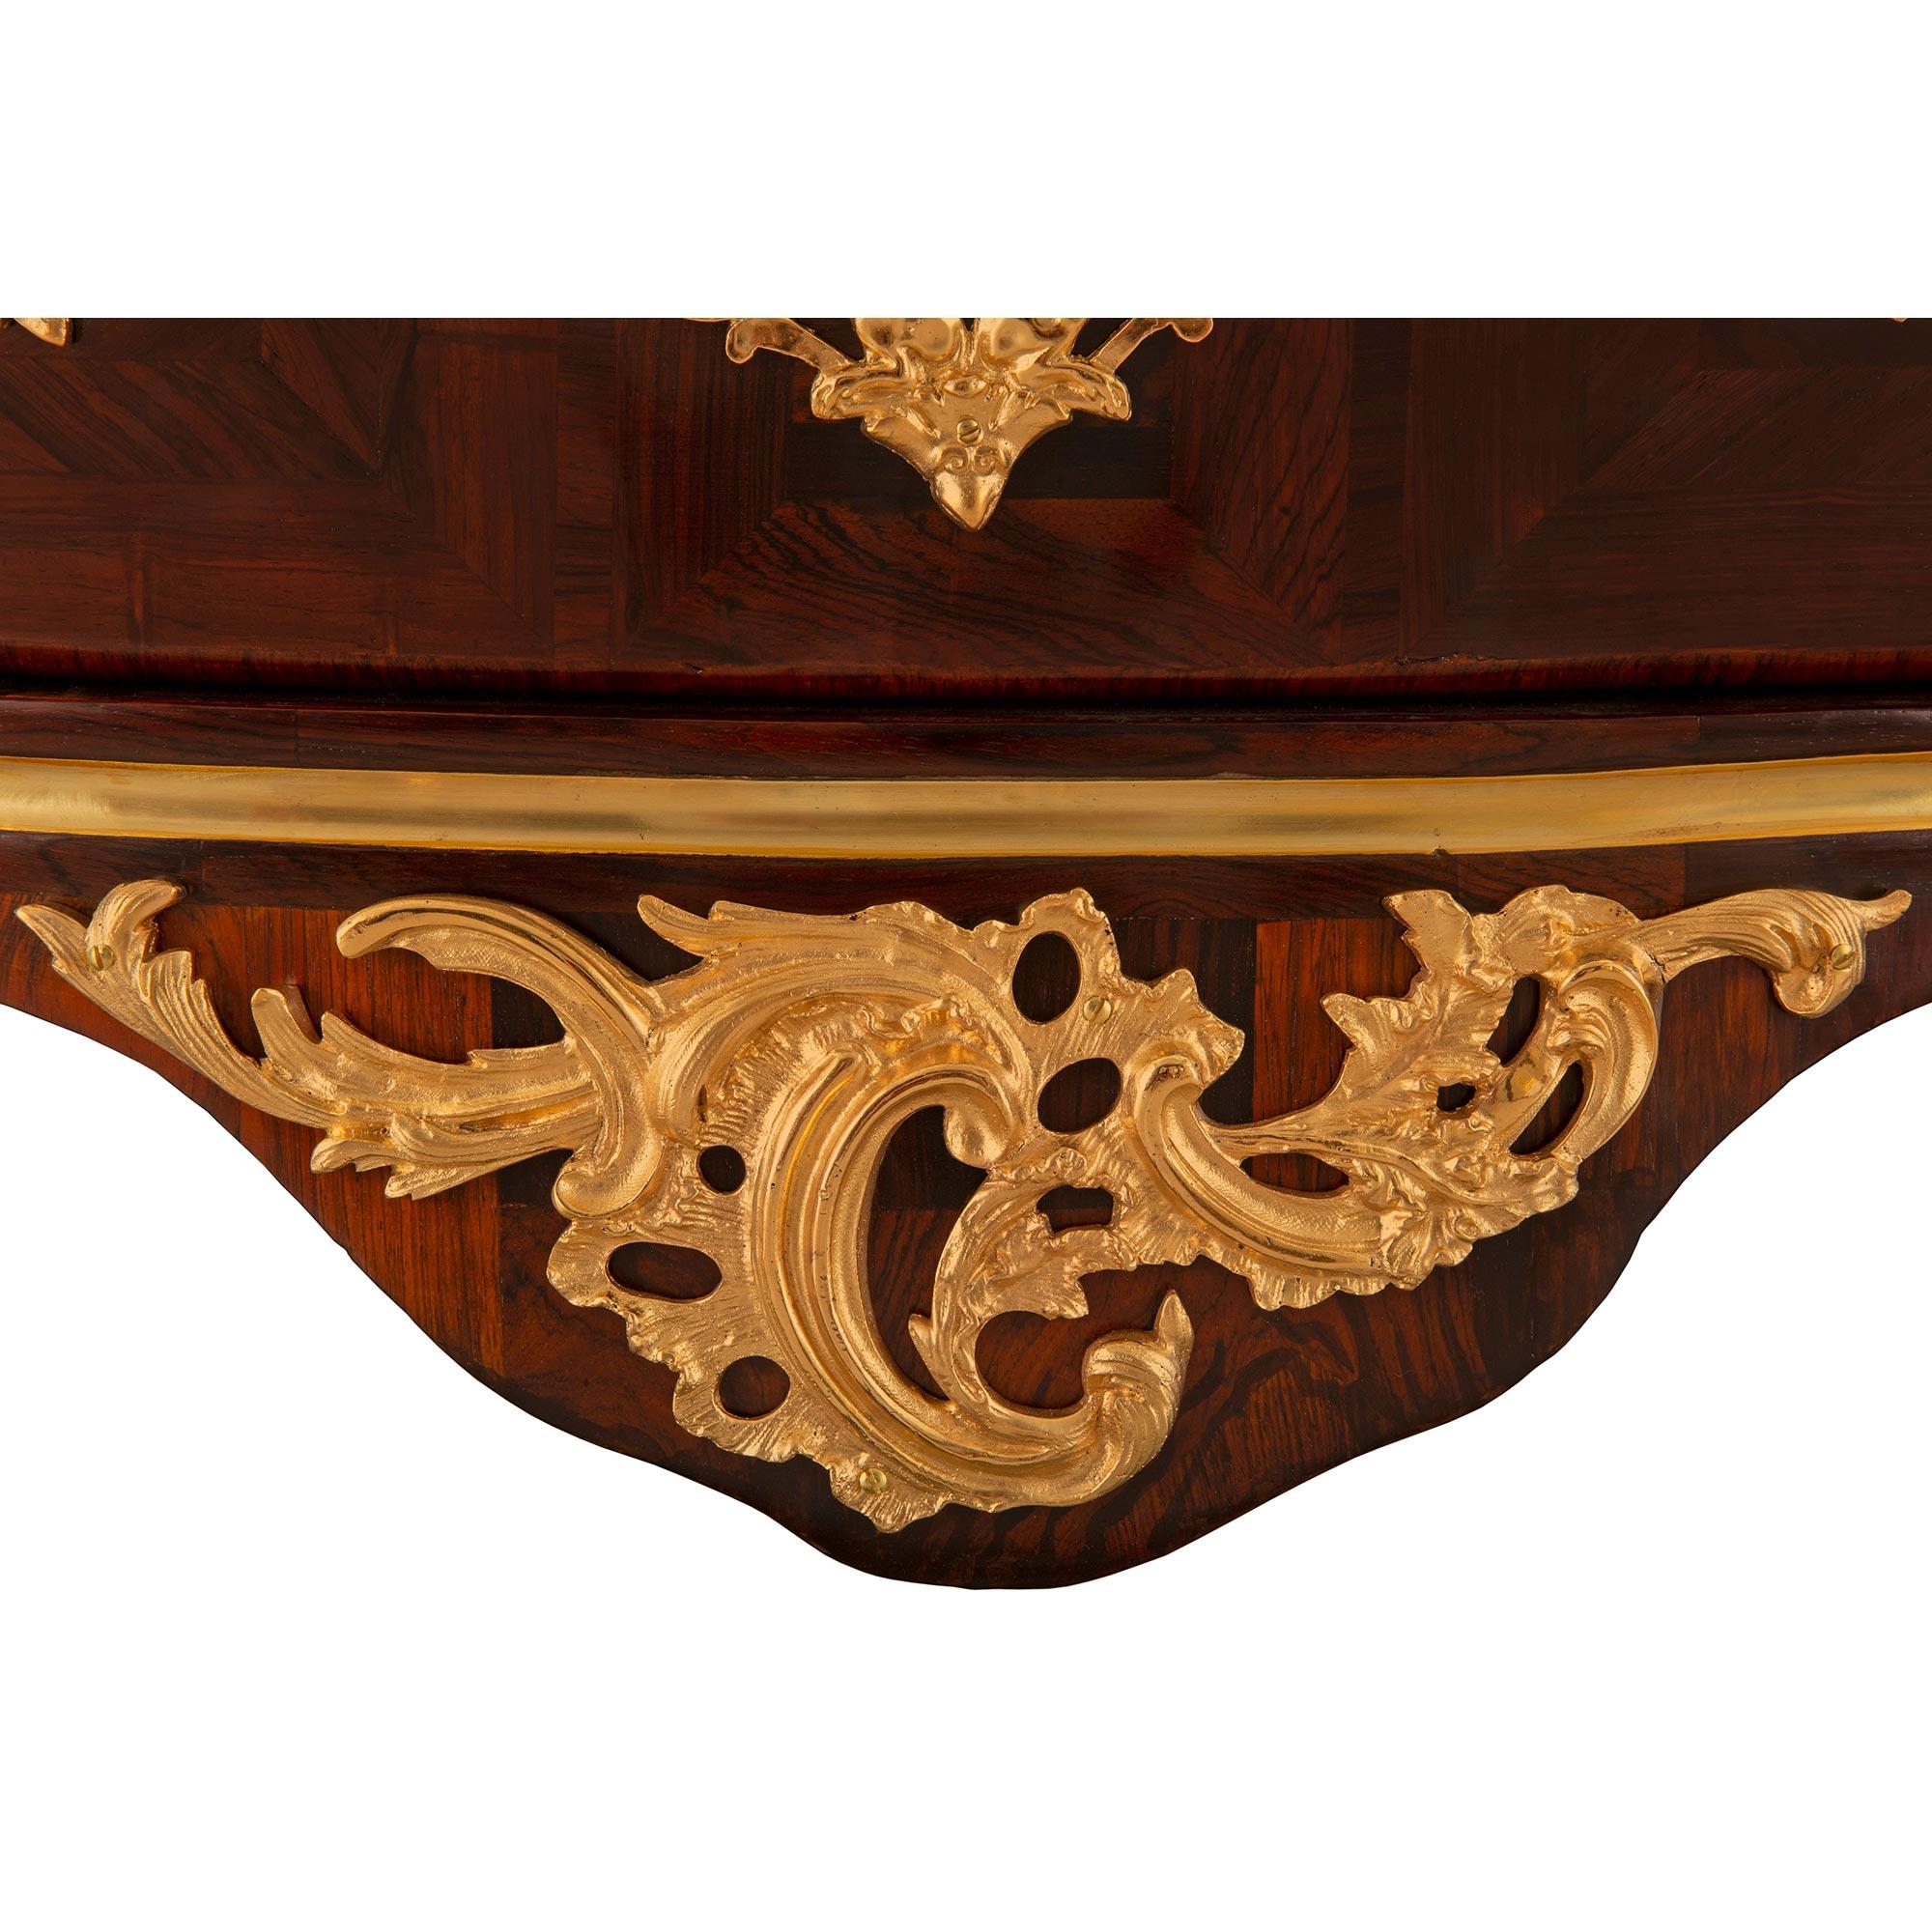 French Mid-18th Century Régence Period Rosewood, Ormolu and Marble Commode For Sale 6